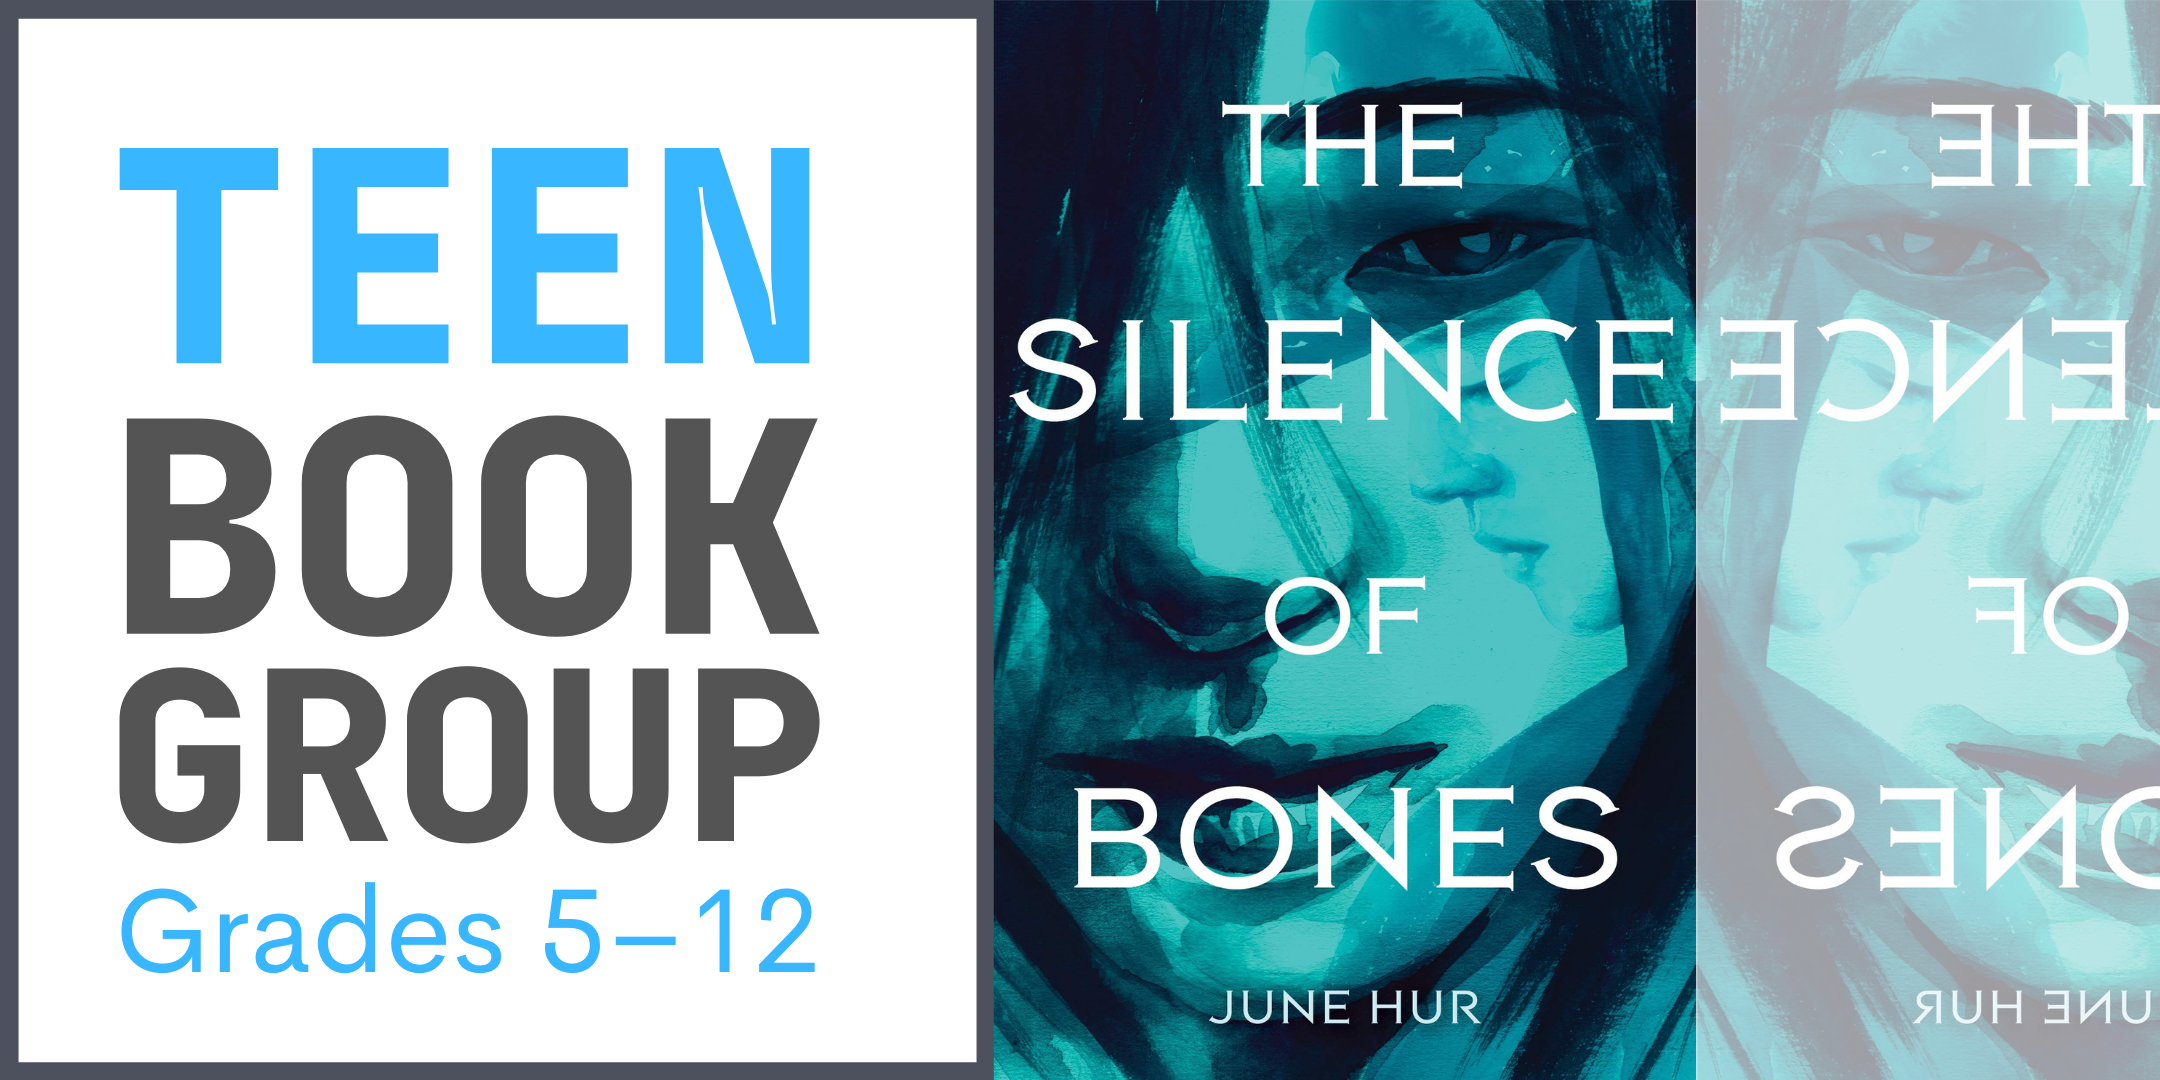 Teen Book Group: Grades 5-12 featuring The Silence of the Bones image